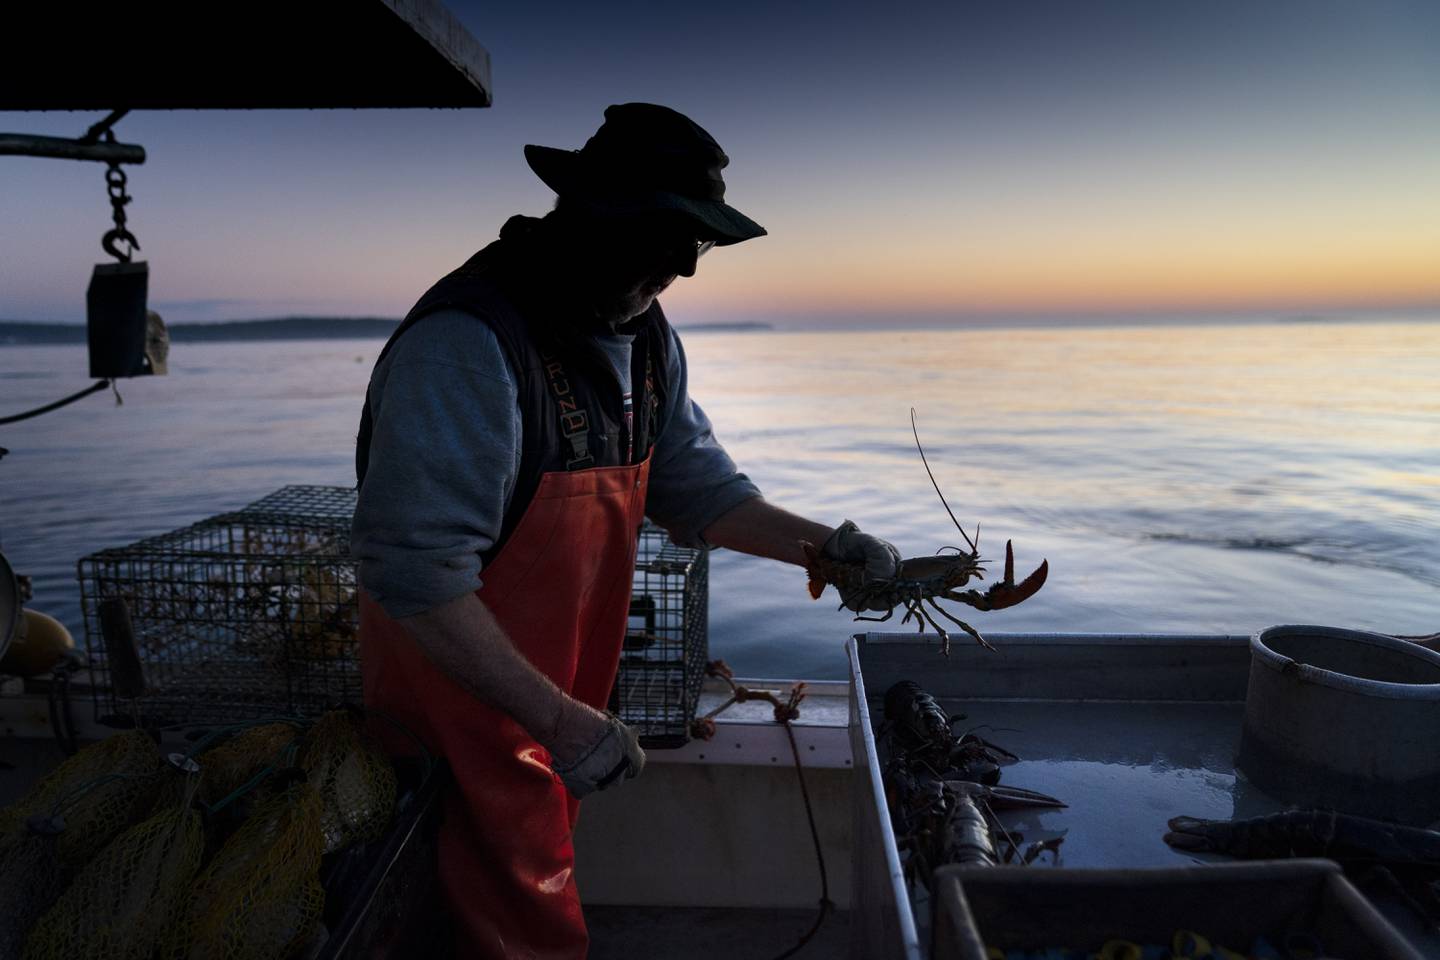 Despite the tariff war, the Chinese appetite for lobster appeared undimmed and once the tariffs were lifted, Maine founding itself on a level playing field with the Canadians again. AP